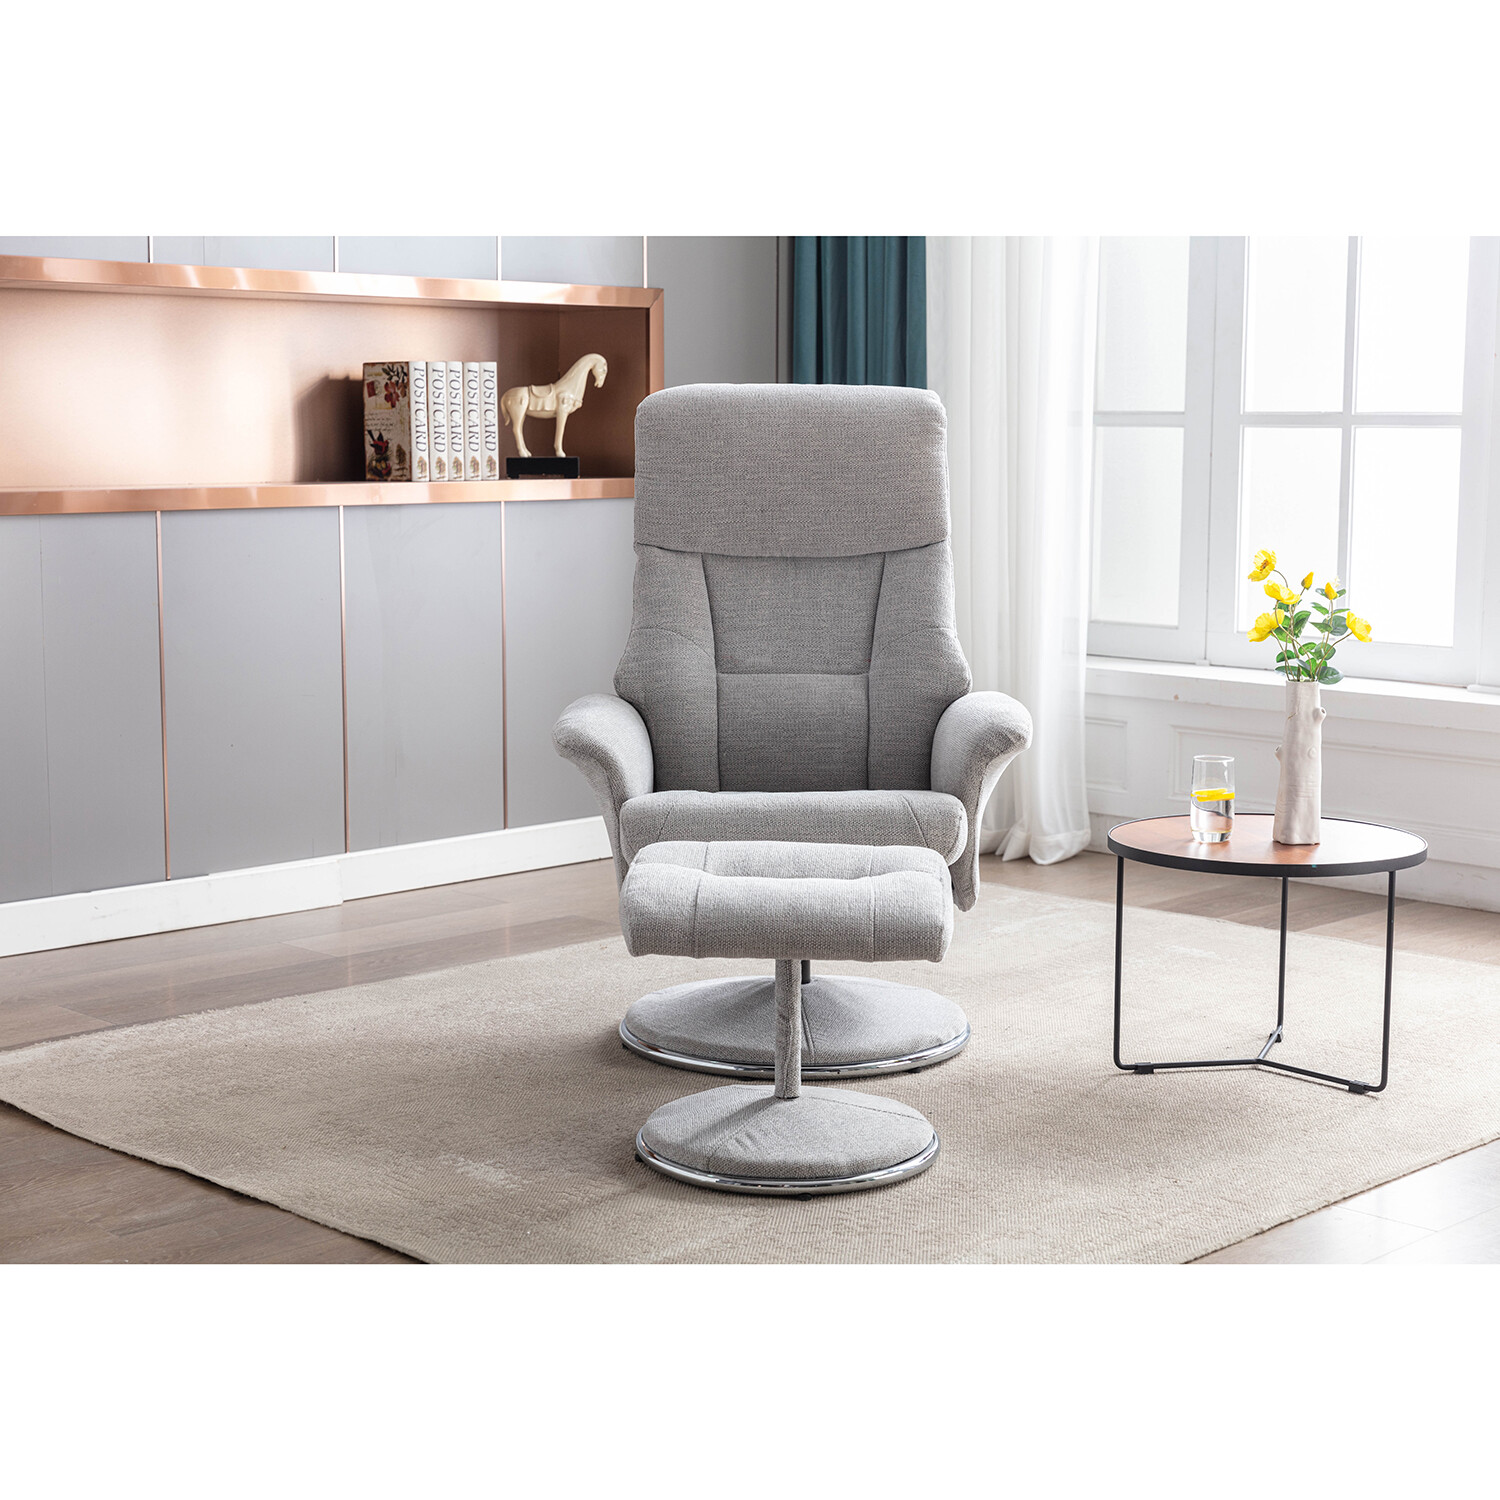 Madrid Grey Fabric Swivel TV Chair with Footrest Image 8